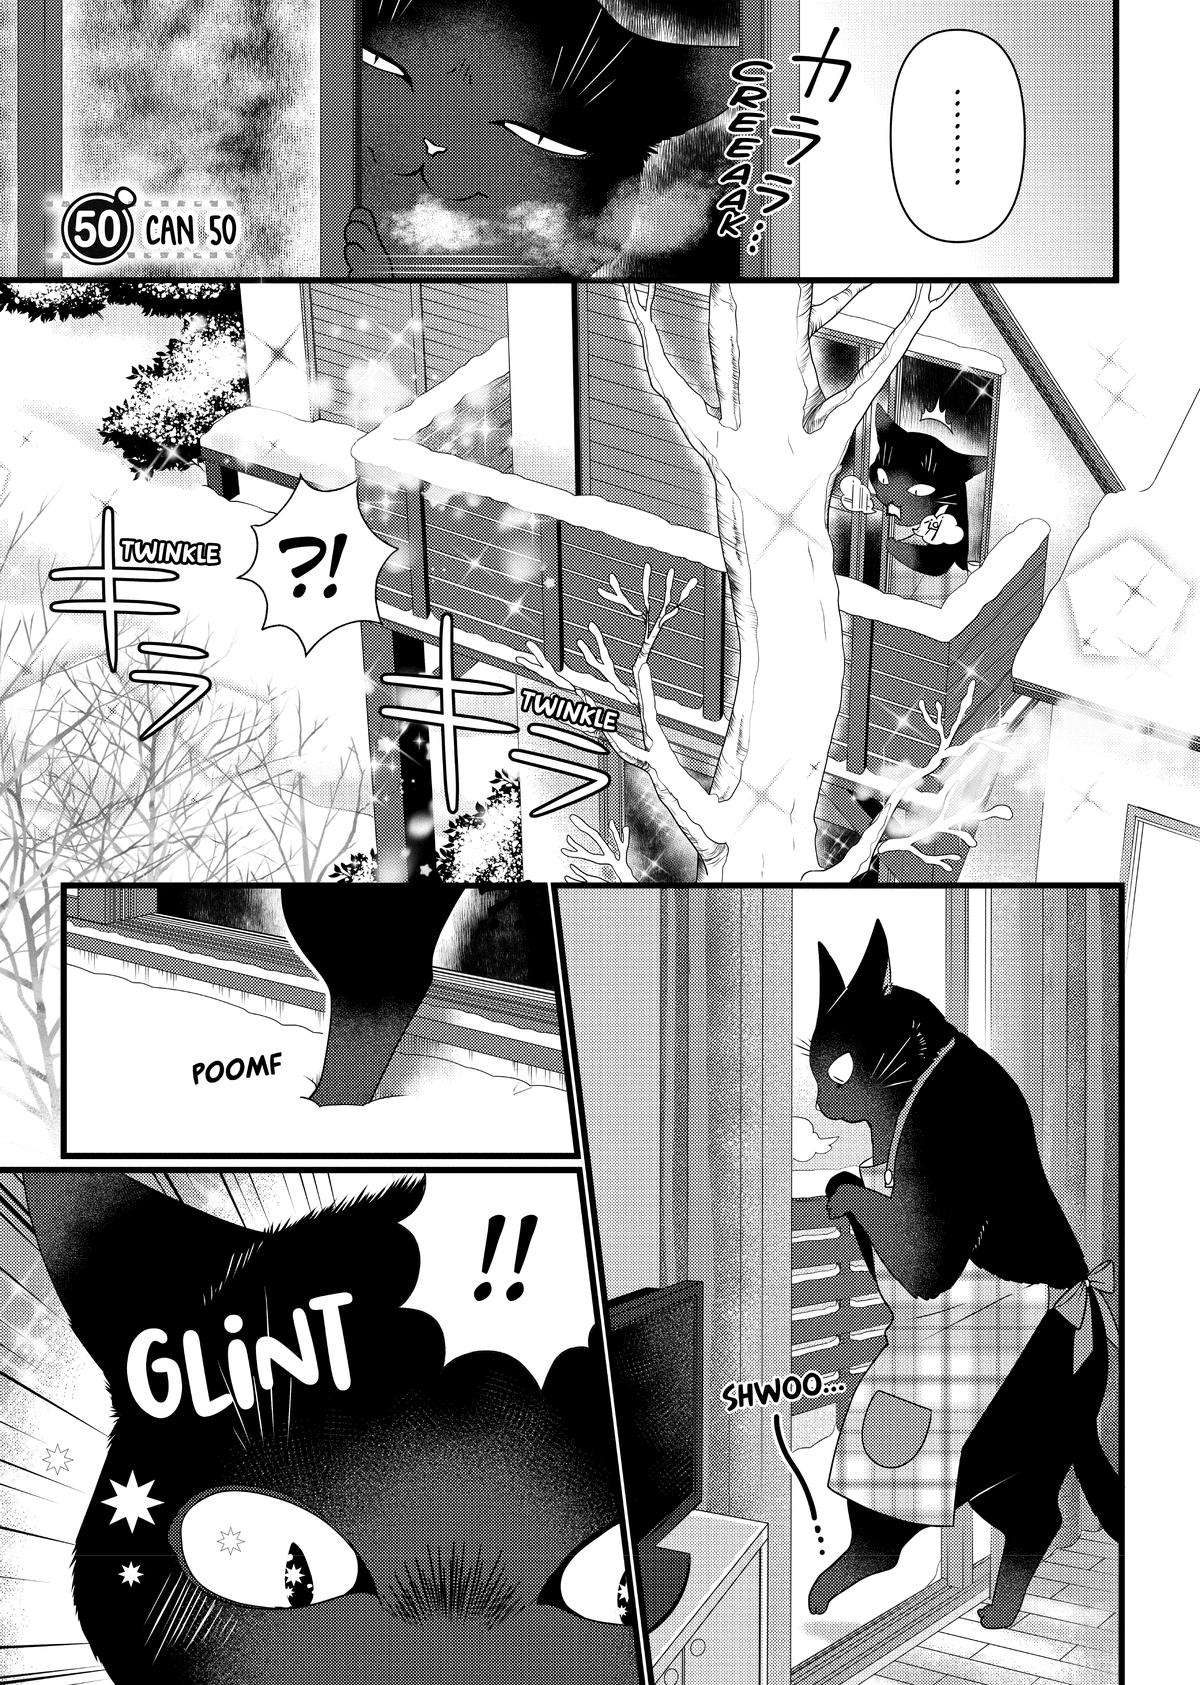 The Masterful Cat is Depressed Again Today - chapter 50 - #1